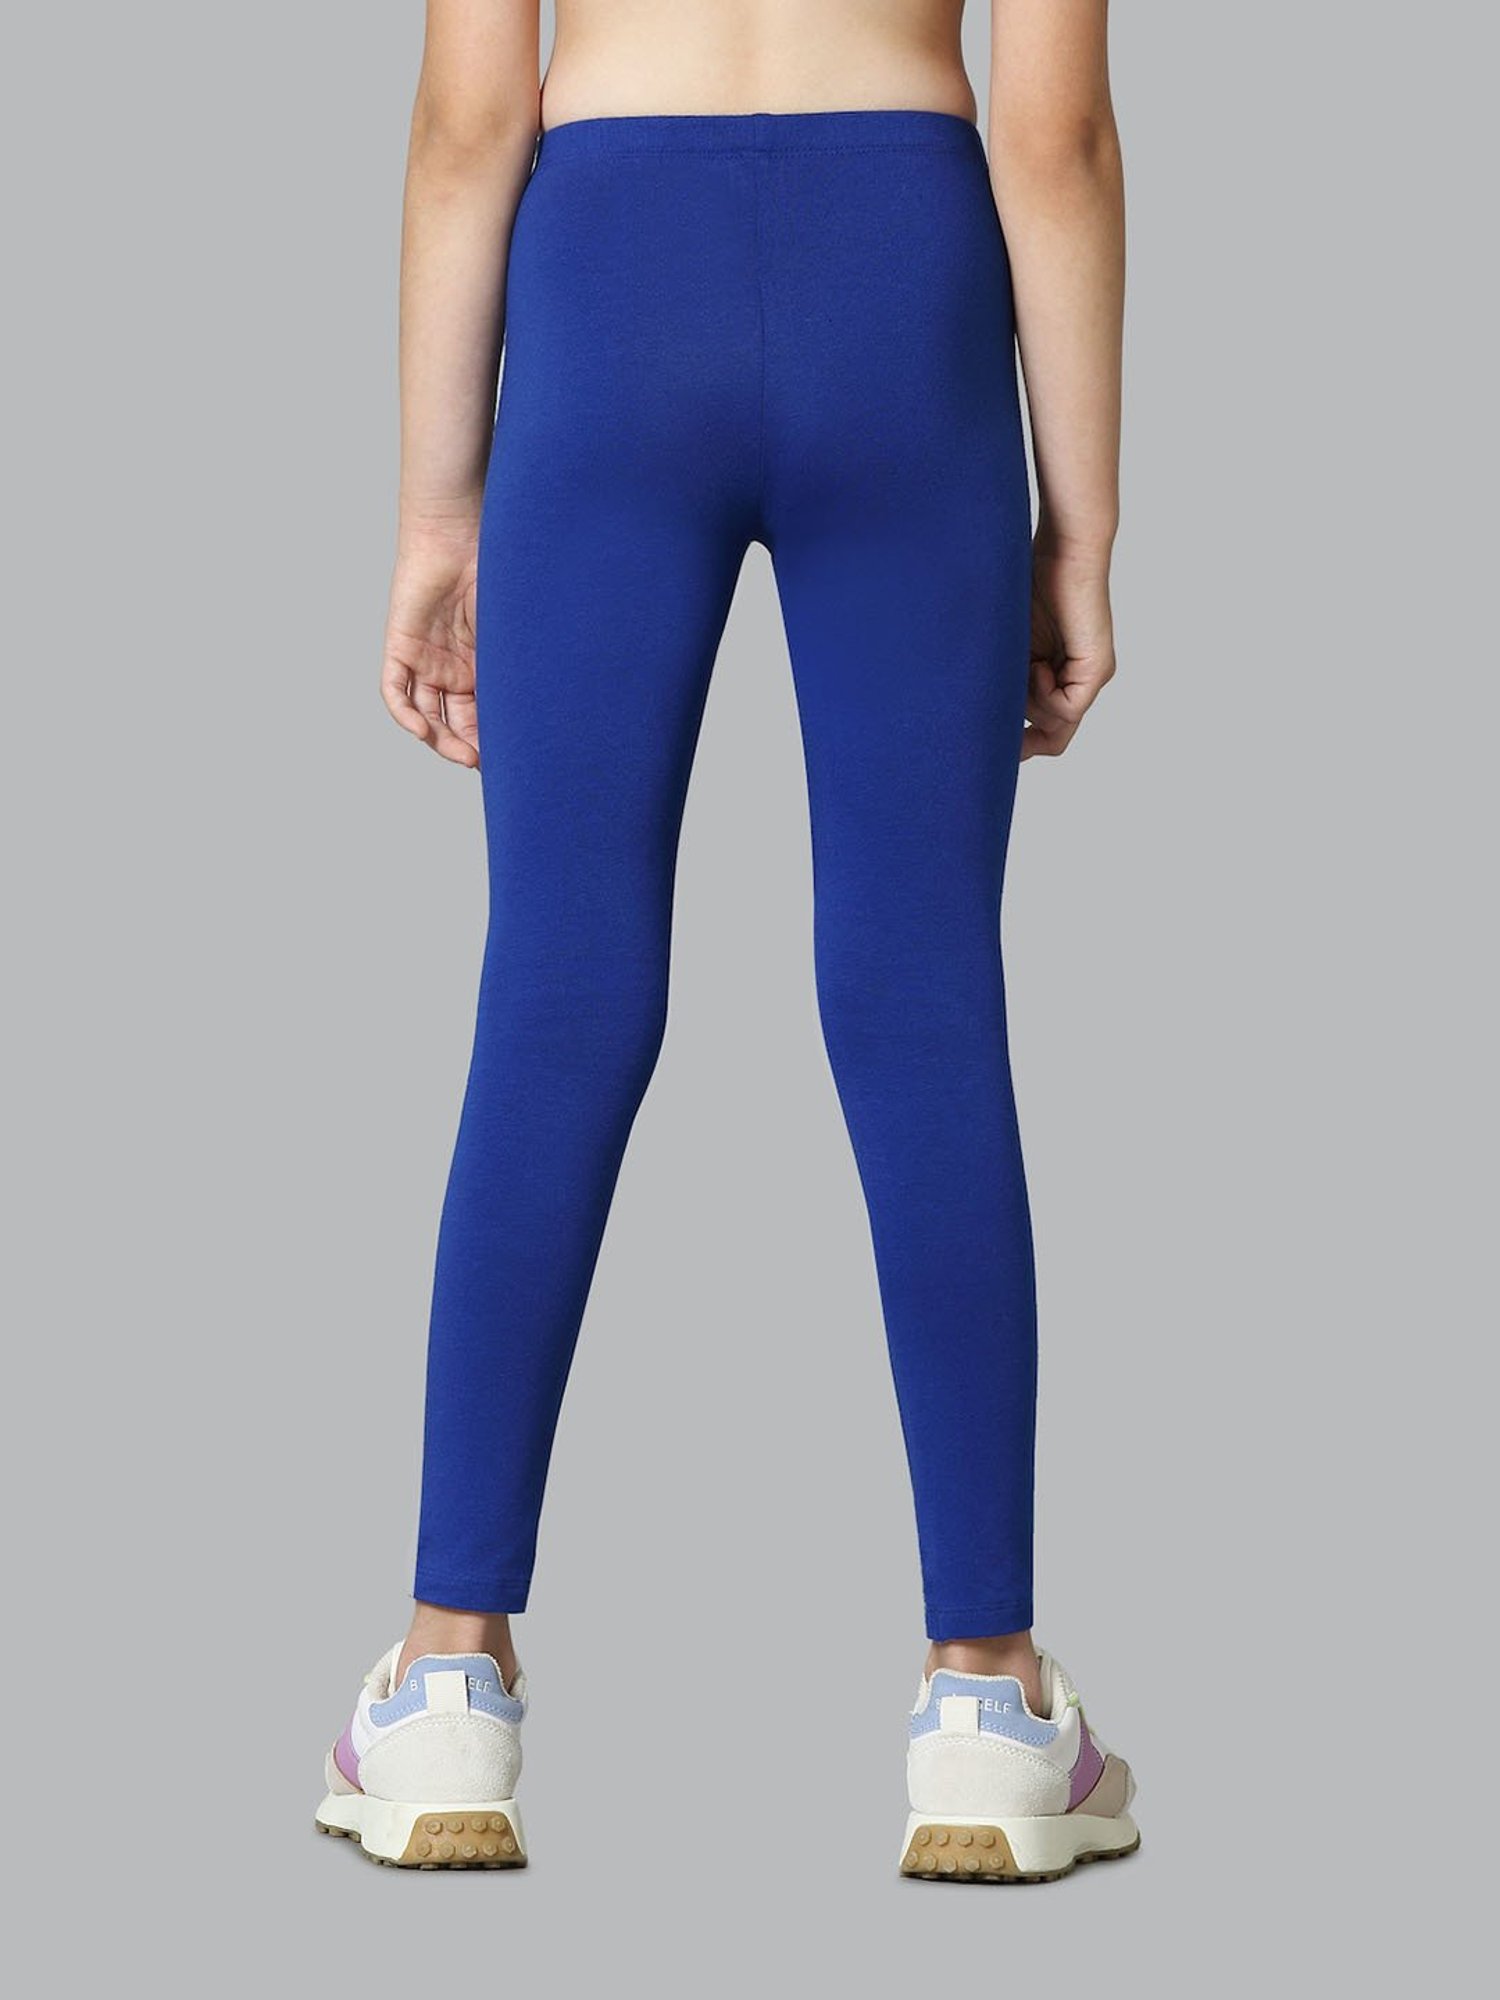 Discover more than 124 electric blue leggings best